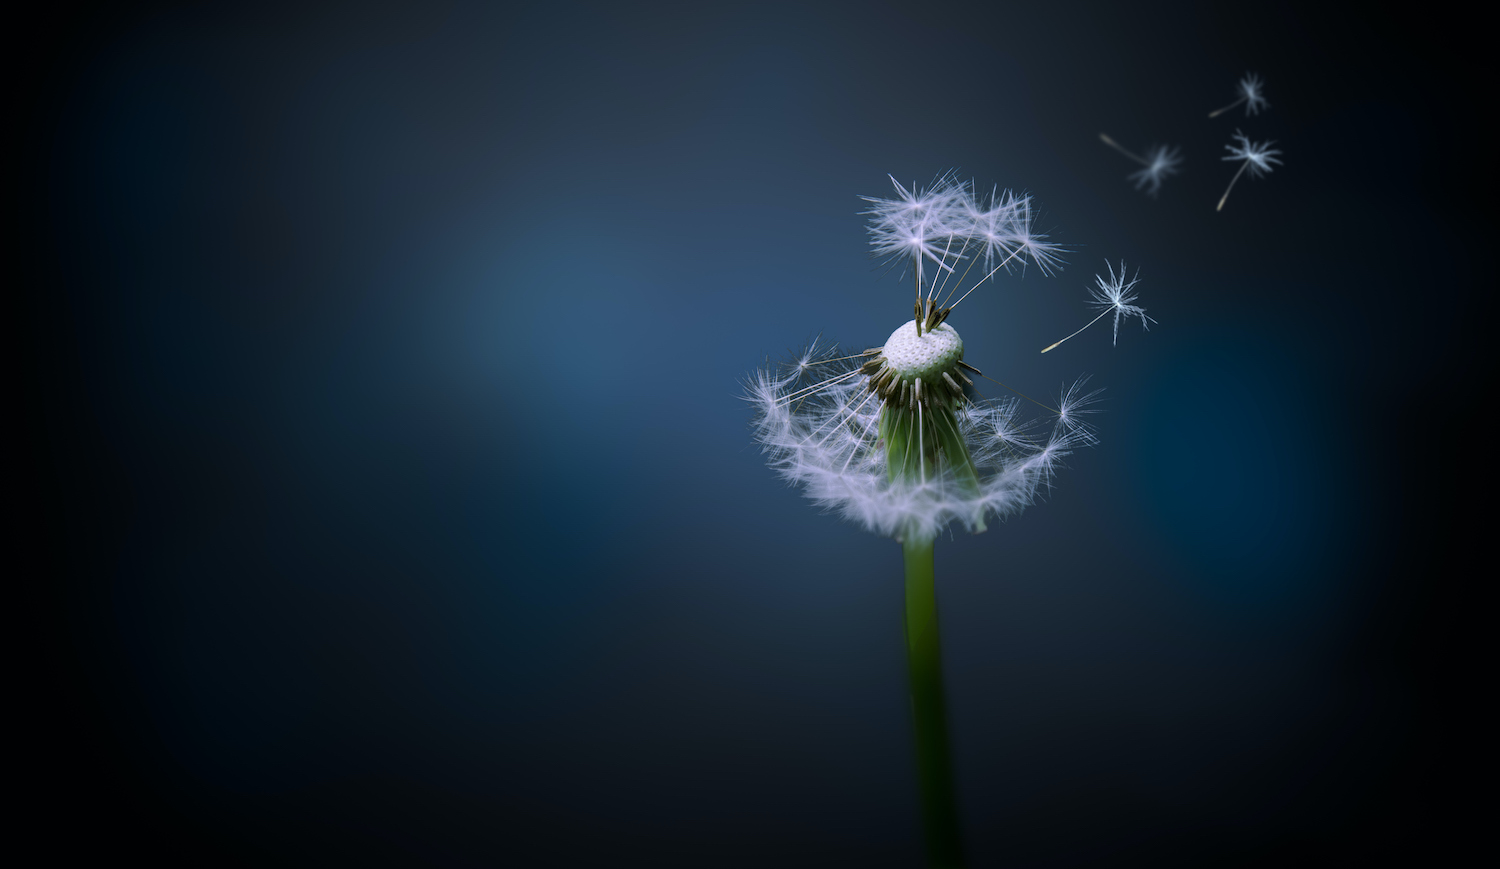 A picture of a Dandelion in the wind, with a background of cool blue colours, blurred from the narrow pane of focus. Composition made in photoshop. (A picture of a Dandelion in the wind, with a background of cool blue colours, blurred from the narrow